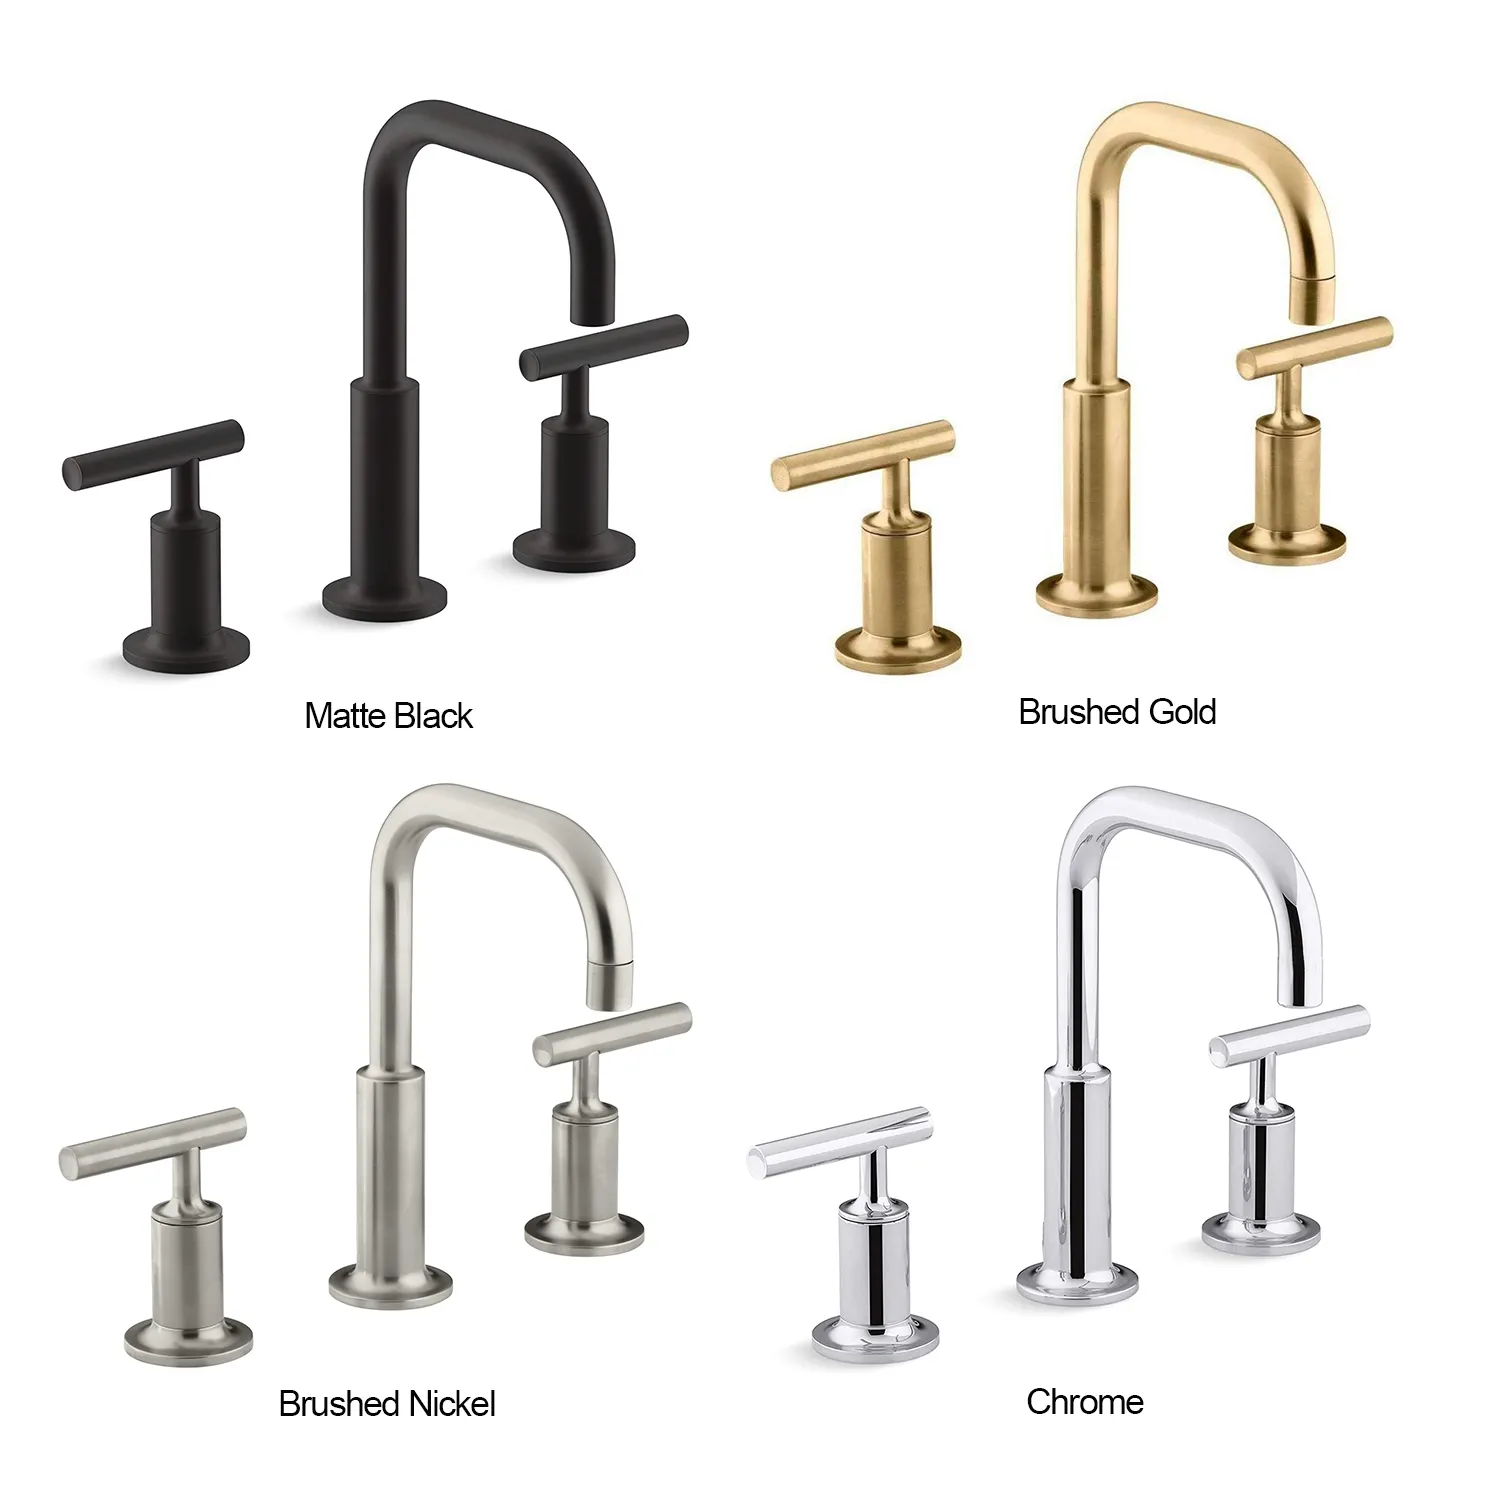 Aquacubic cUPC Brushed Gold 8 Inch Brass Sink Faucet 3 Hole Widespread Bathroom Faucet with Water Supply Lines